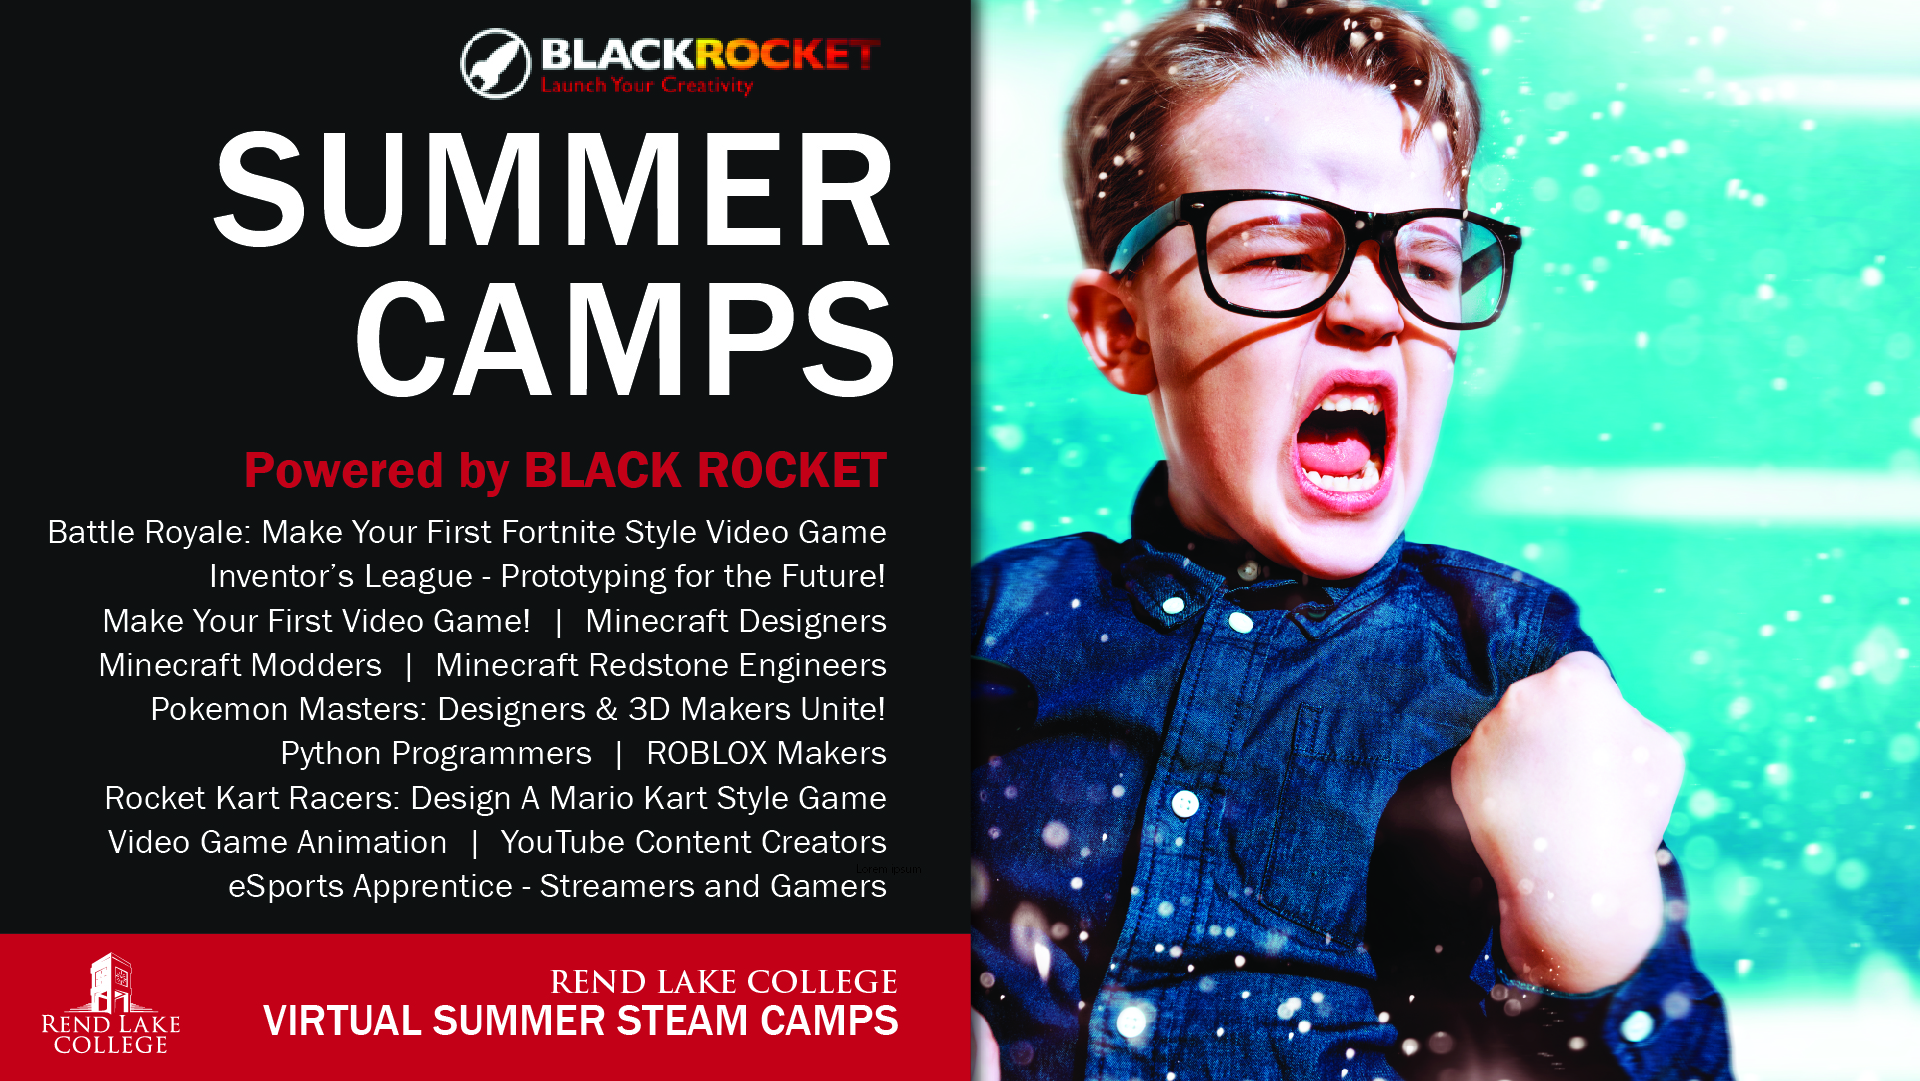 Sign Up For Virtual Kids Camps At Rlc Rend Lake College - highschool dorm life roblox codes at the end youtube